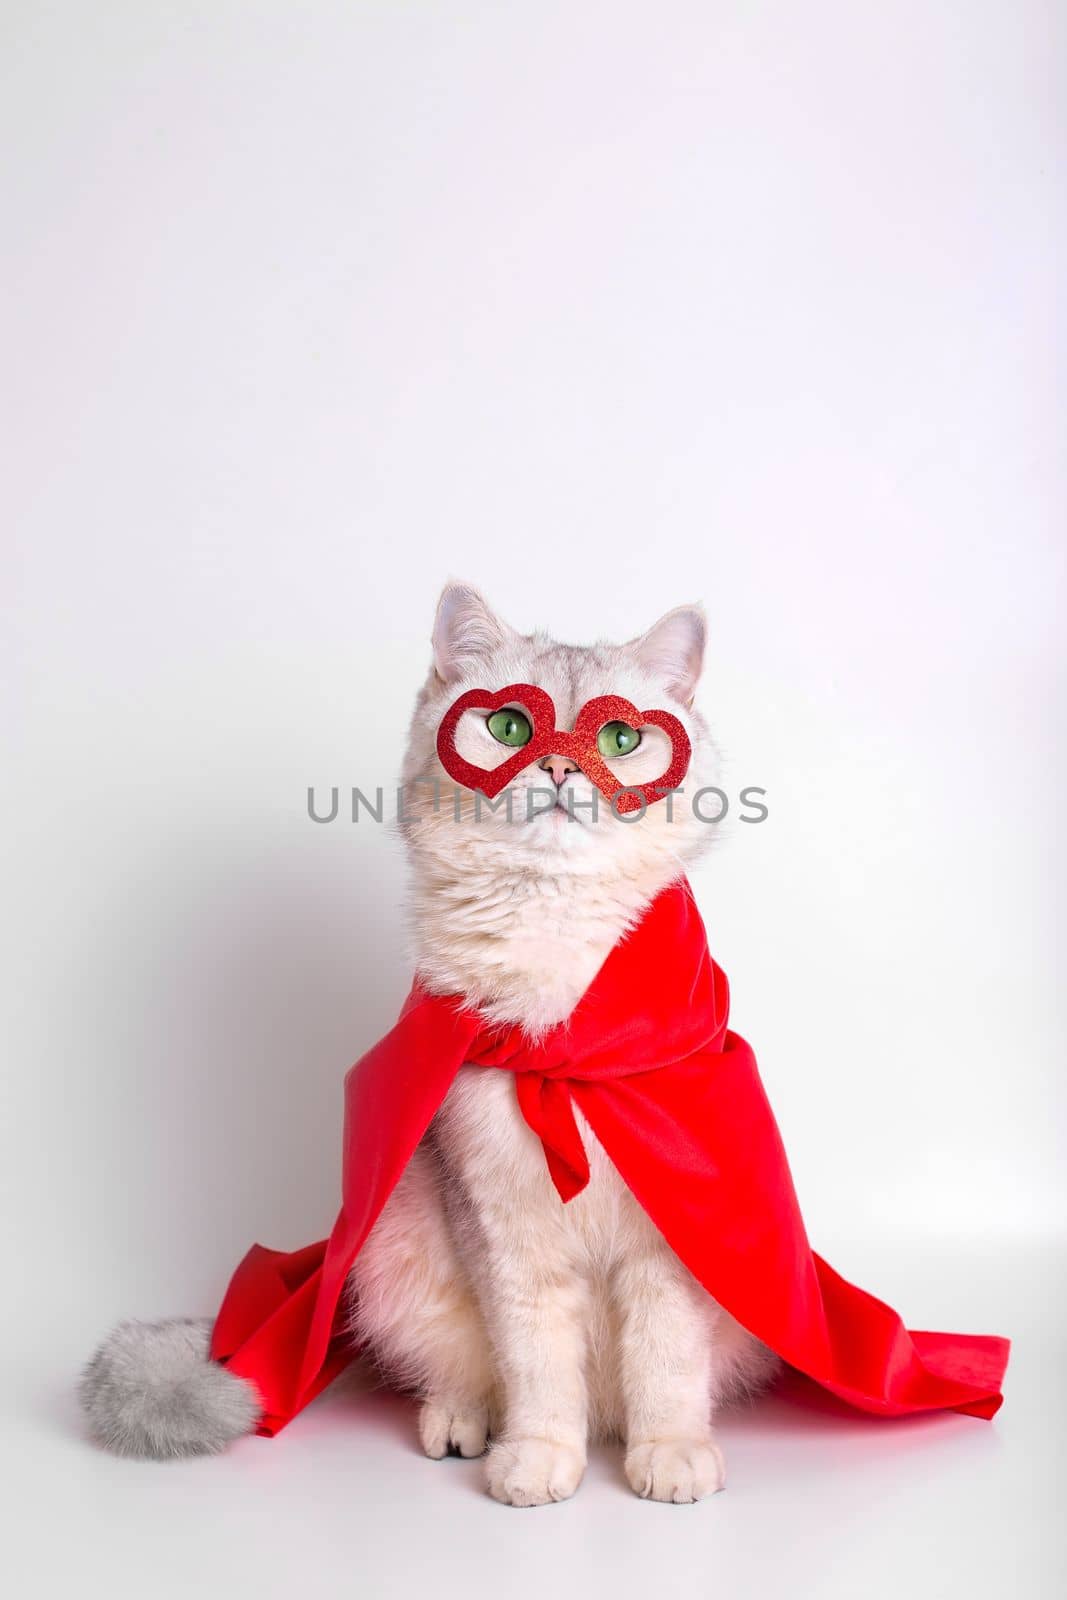 A white cat with green eyes, sits on white background, in a red mask in the form of hearts and a red cape, looks at camera. Close up. Vertical. Copy space